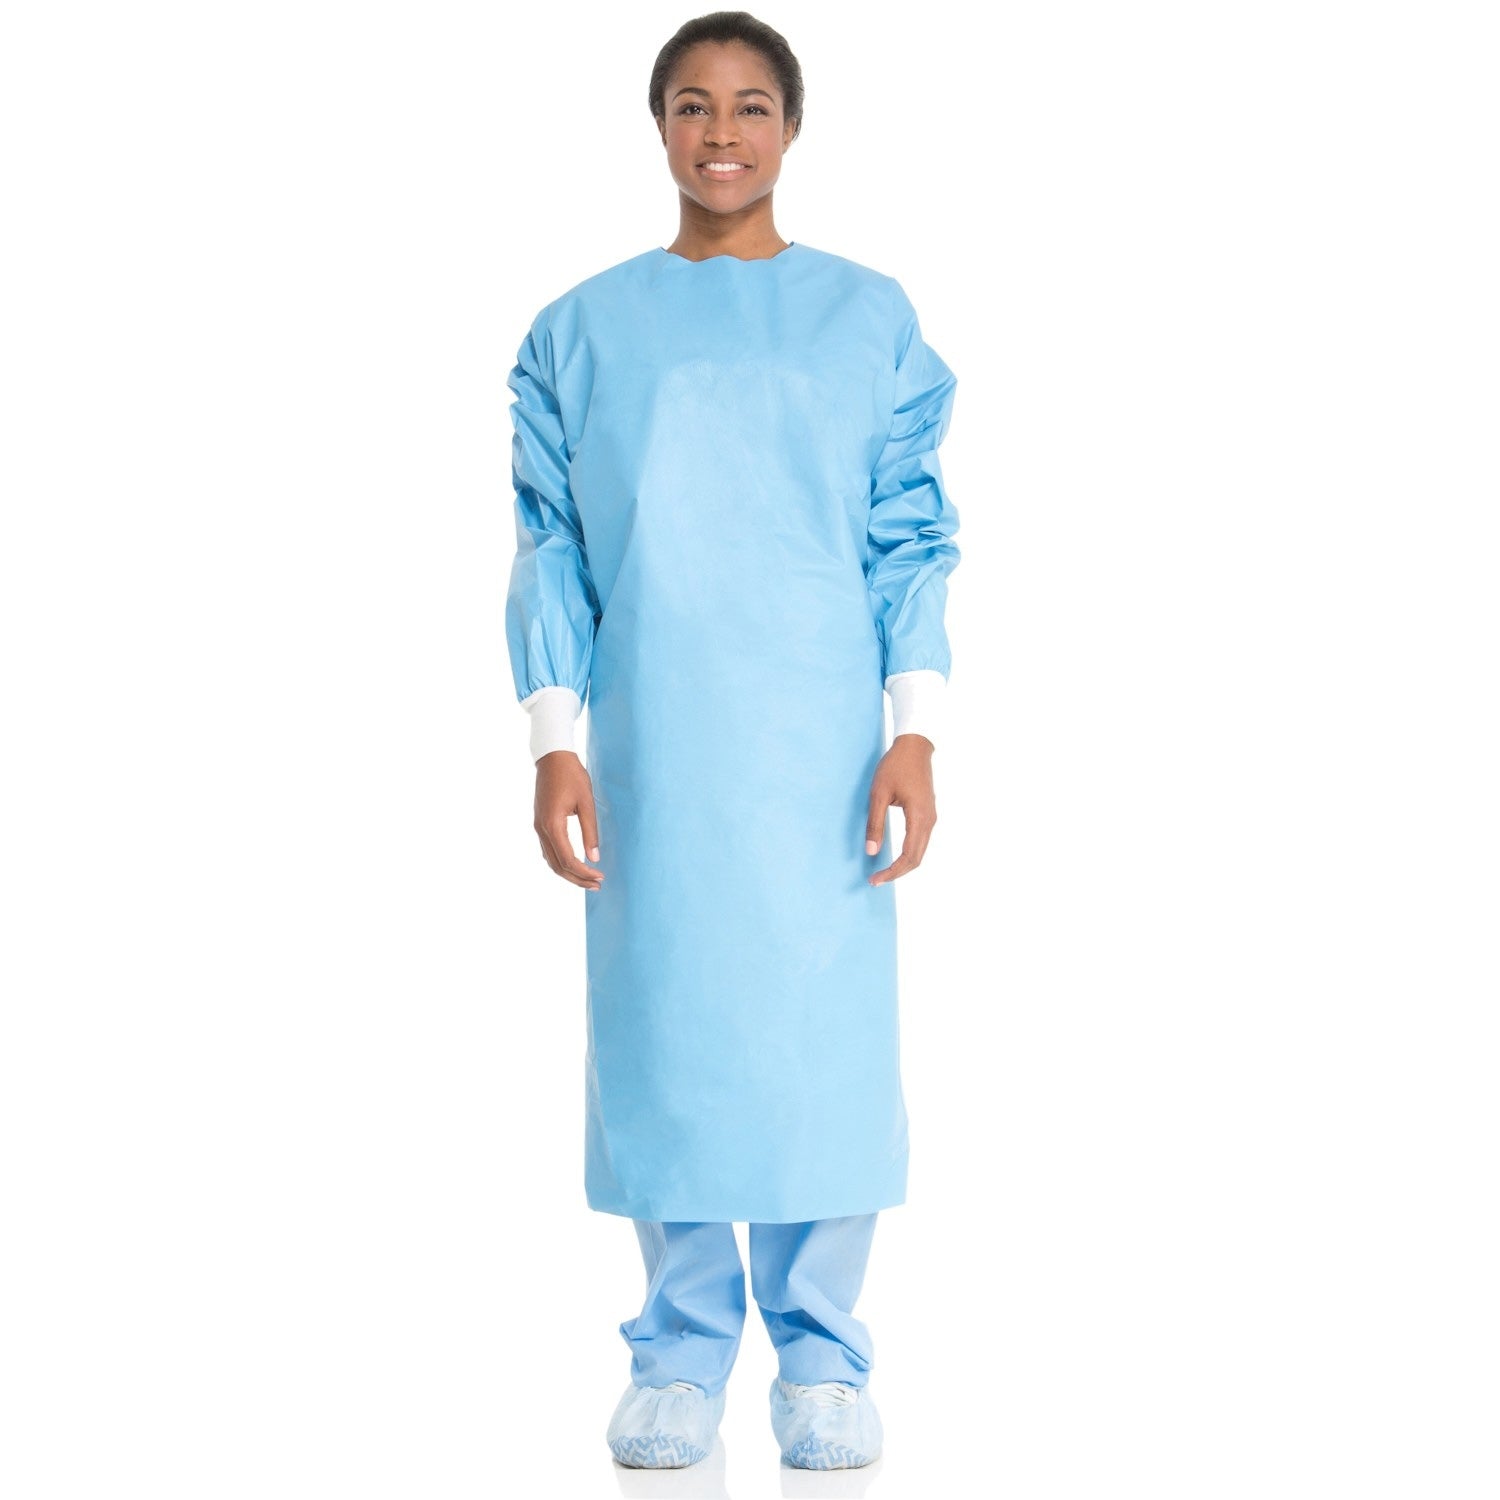 Barrier Impervious Gown | Blue | Pack of 50 (2)